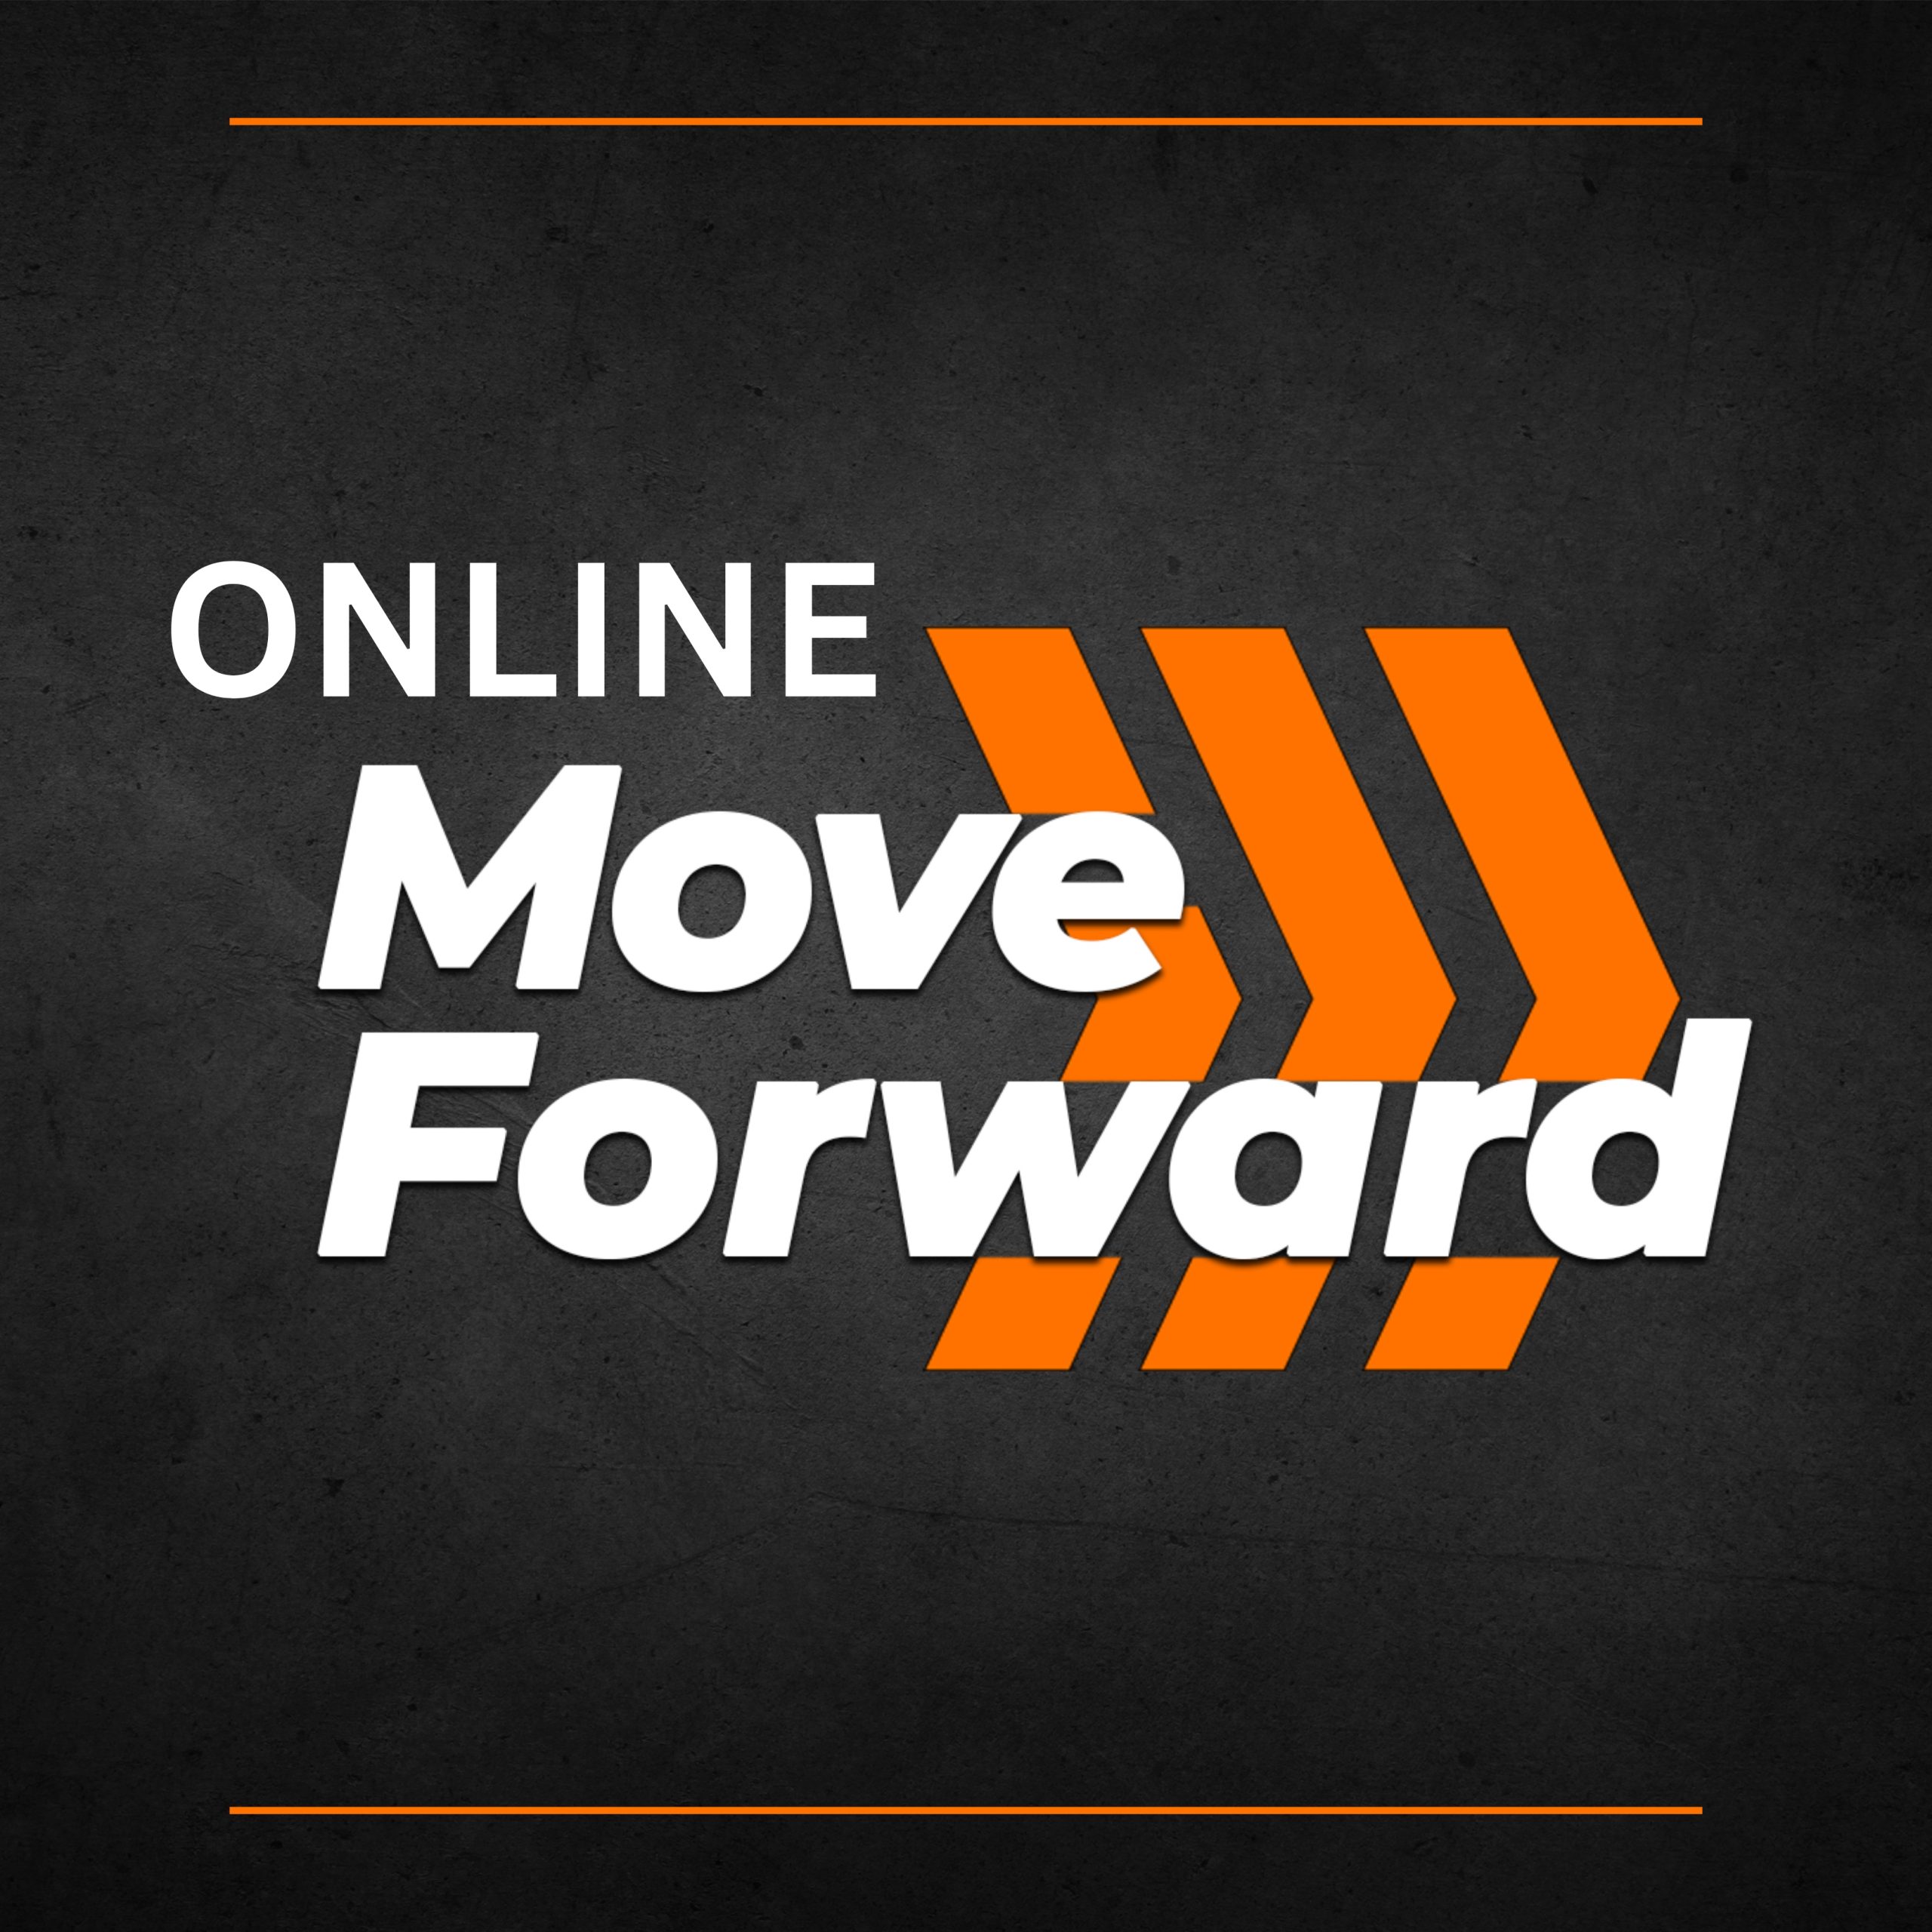 Move Forward Online